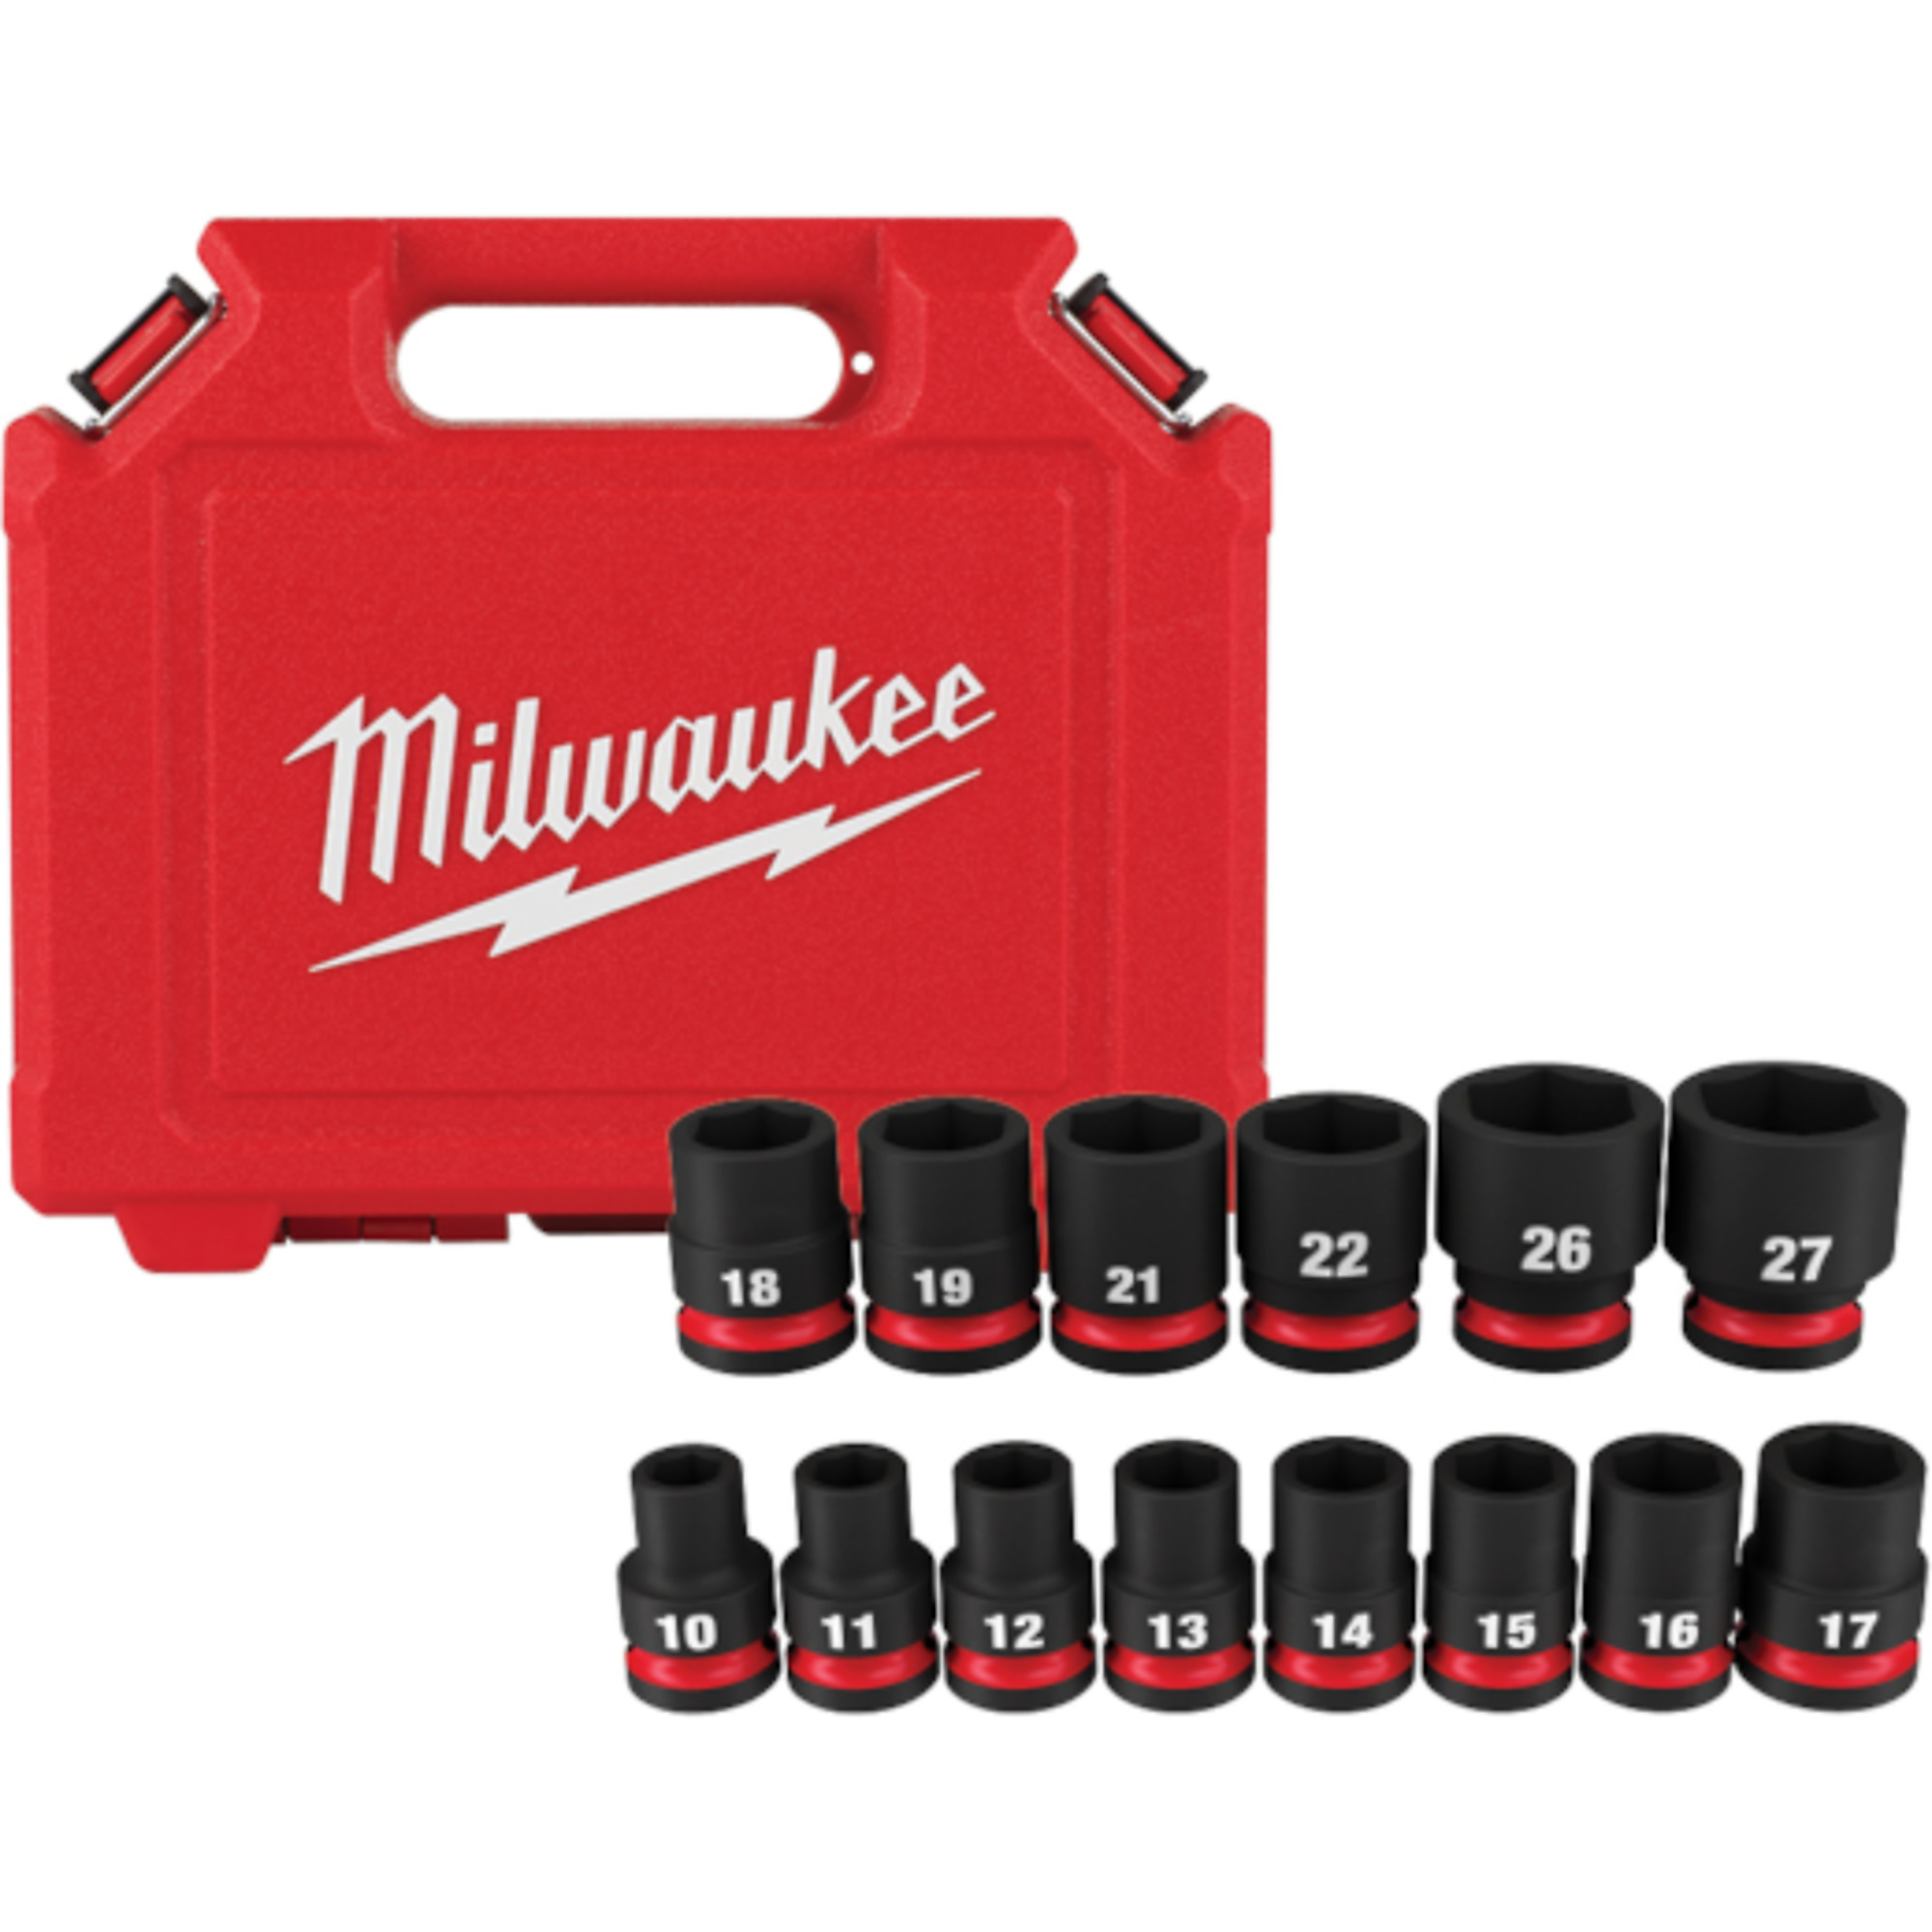 Milwaukee SHOCKWAVE Impact Duty , 14PC 1/2Inch Drive Metric Standard 6 Point Socket Set, Pieces (qty.) 14 Model 49-66-7013